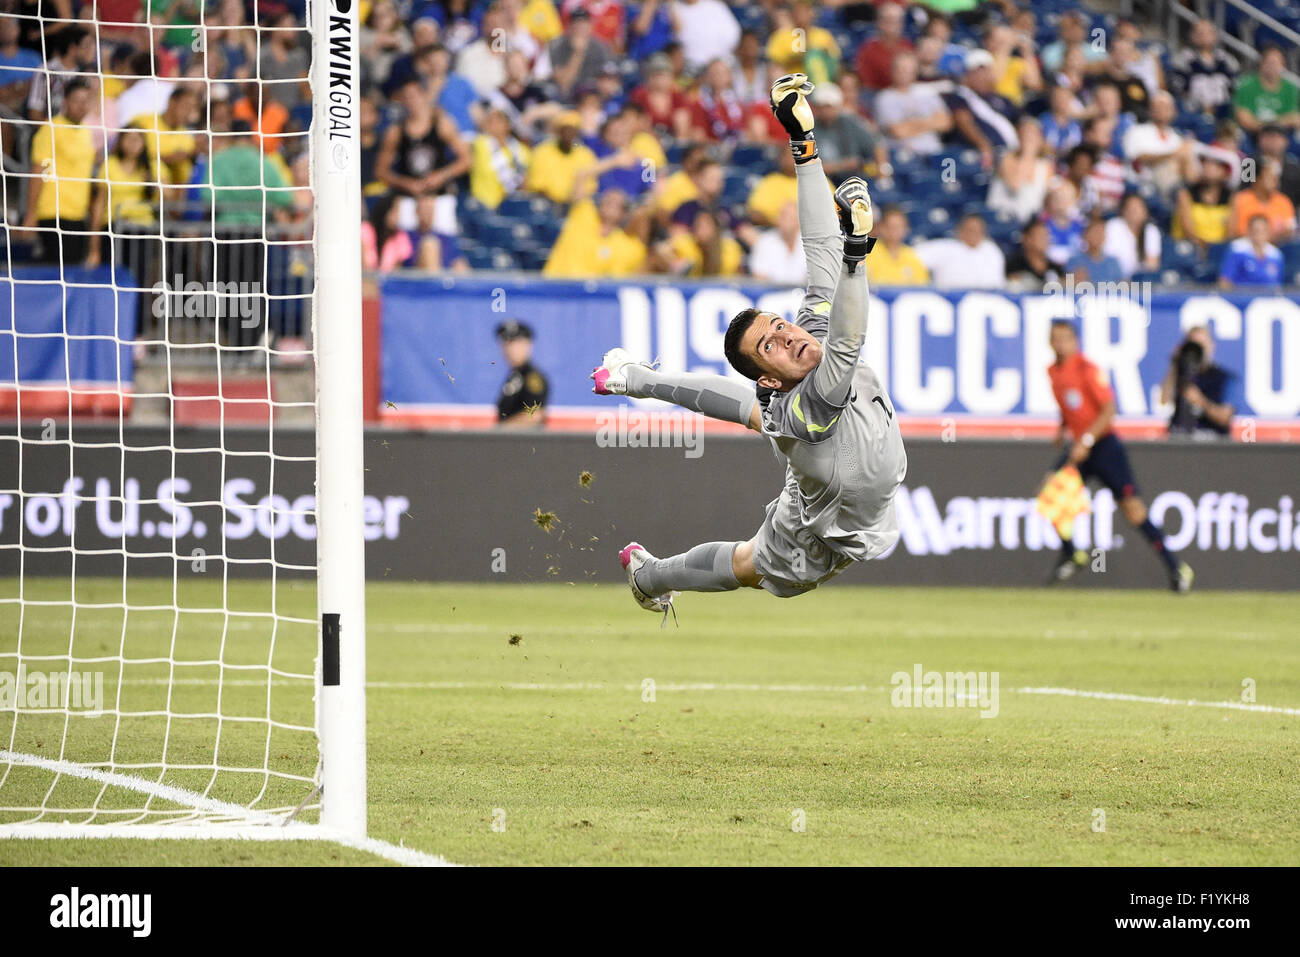 Foxborough, Massachusetts, USA. 8th Sep, 2015. Brazil goalkeeper Marcelo Grohe (12) tries to make a save during the Brazil vs USA International friendly match held at Gillette Stadium in Foxborough, Massachusetts. Eric Canha/CSM/Alamy Live News Stock Photo